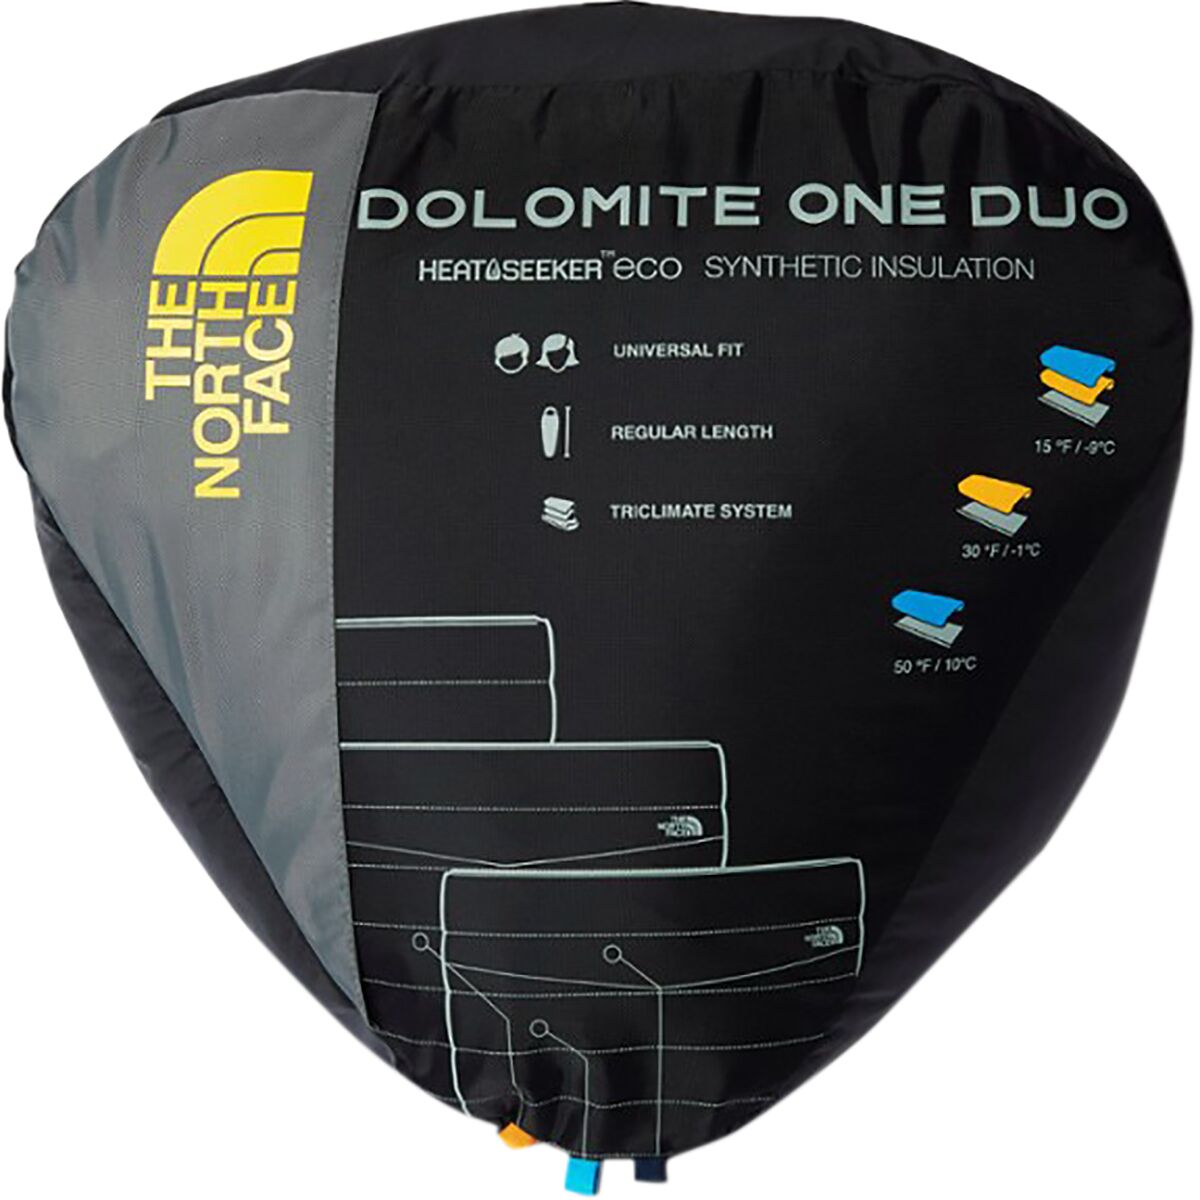 The North Face Dolomite One Double Sleeping - Outdoors